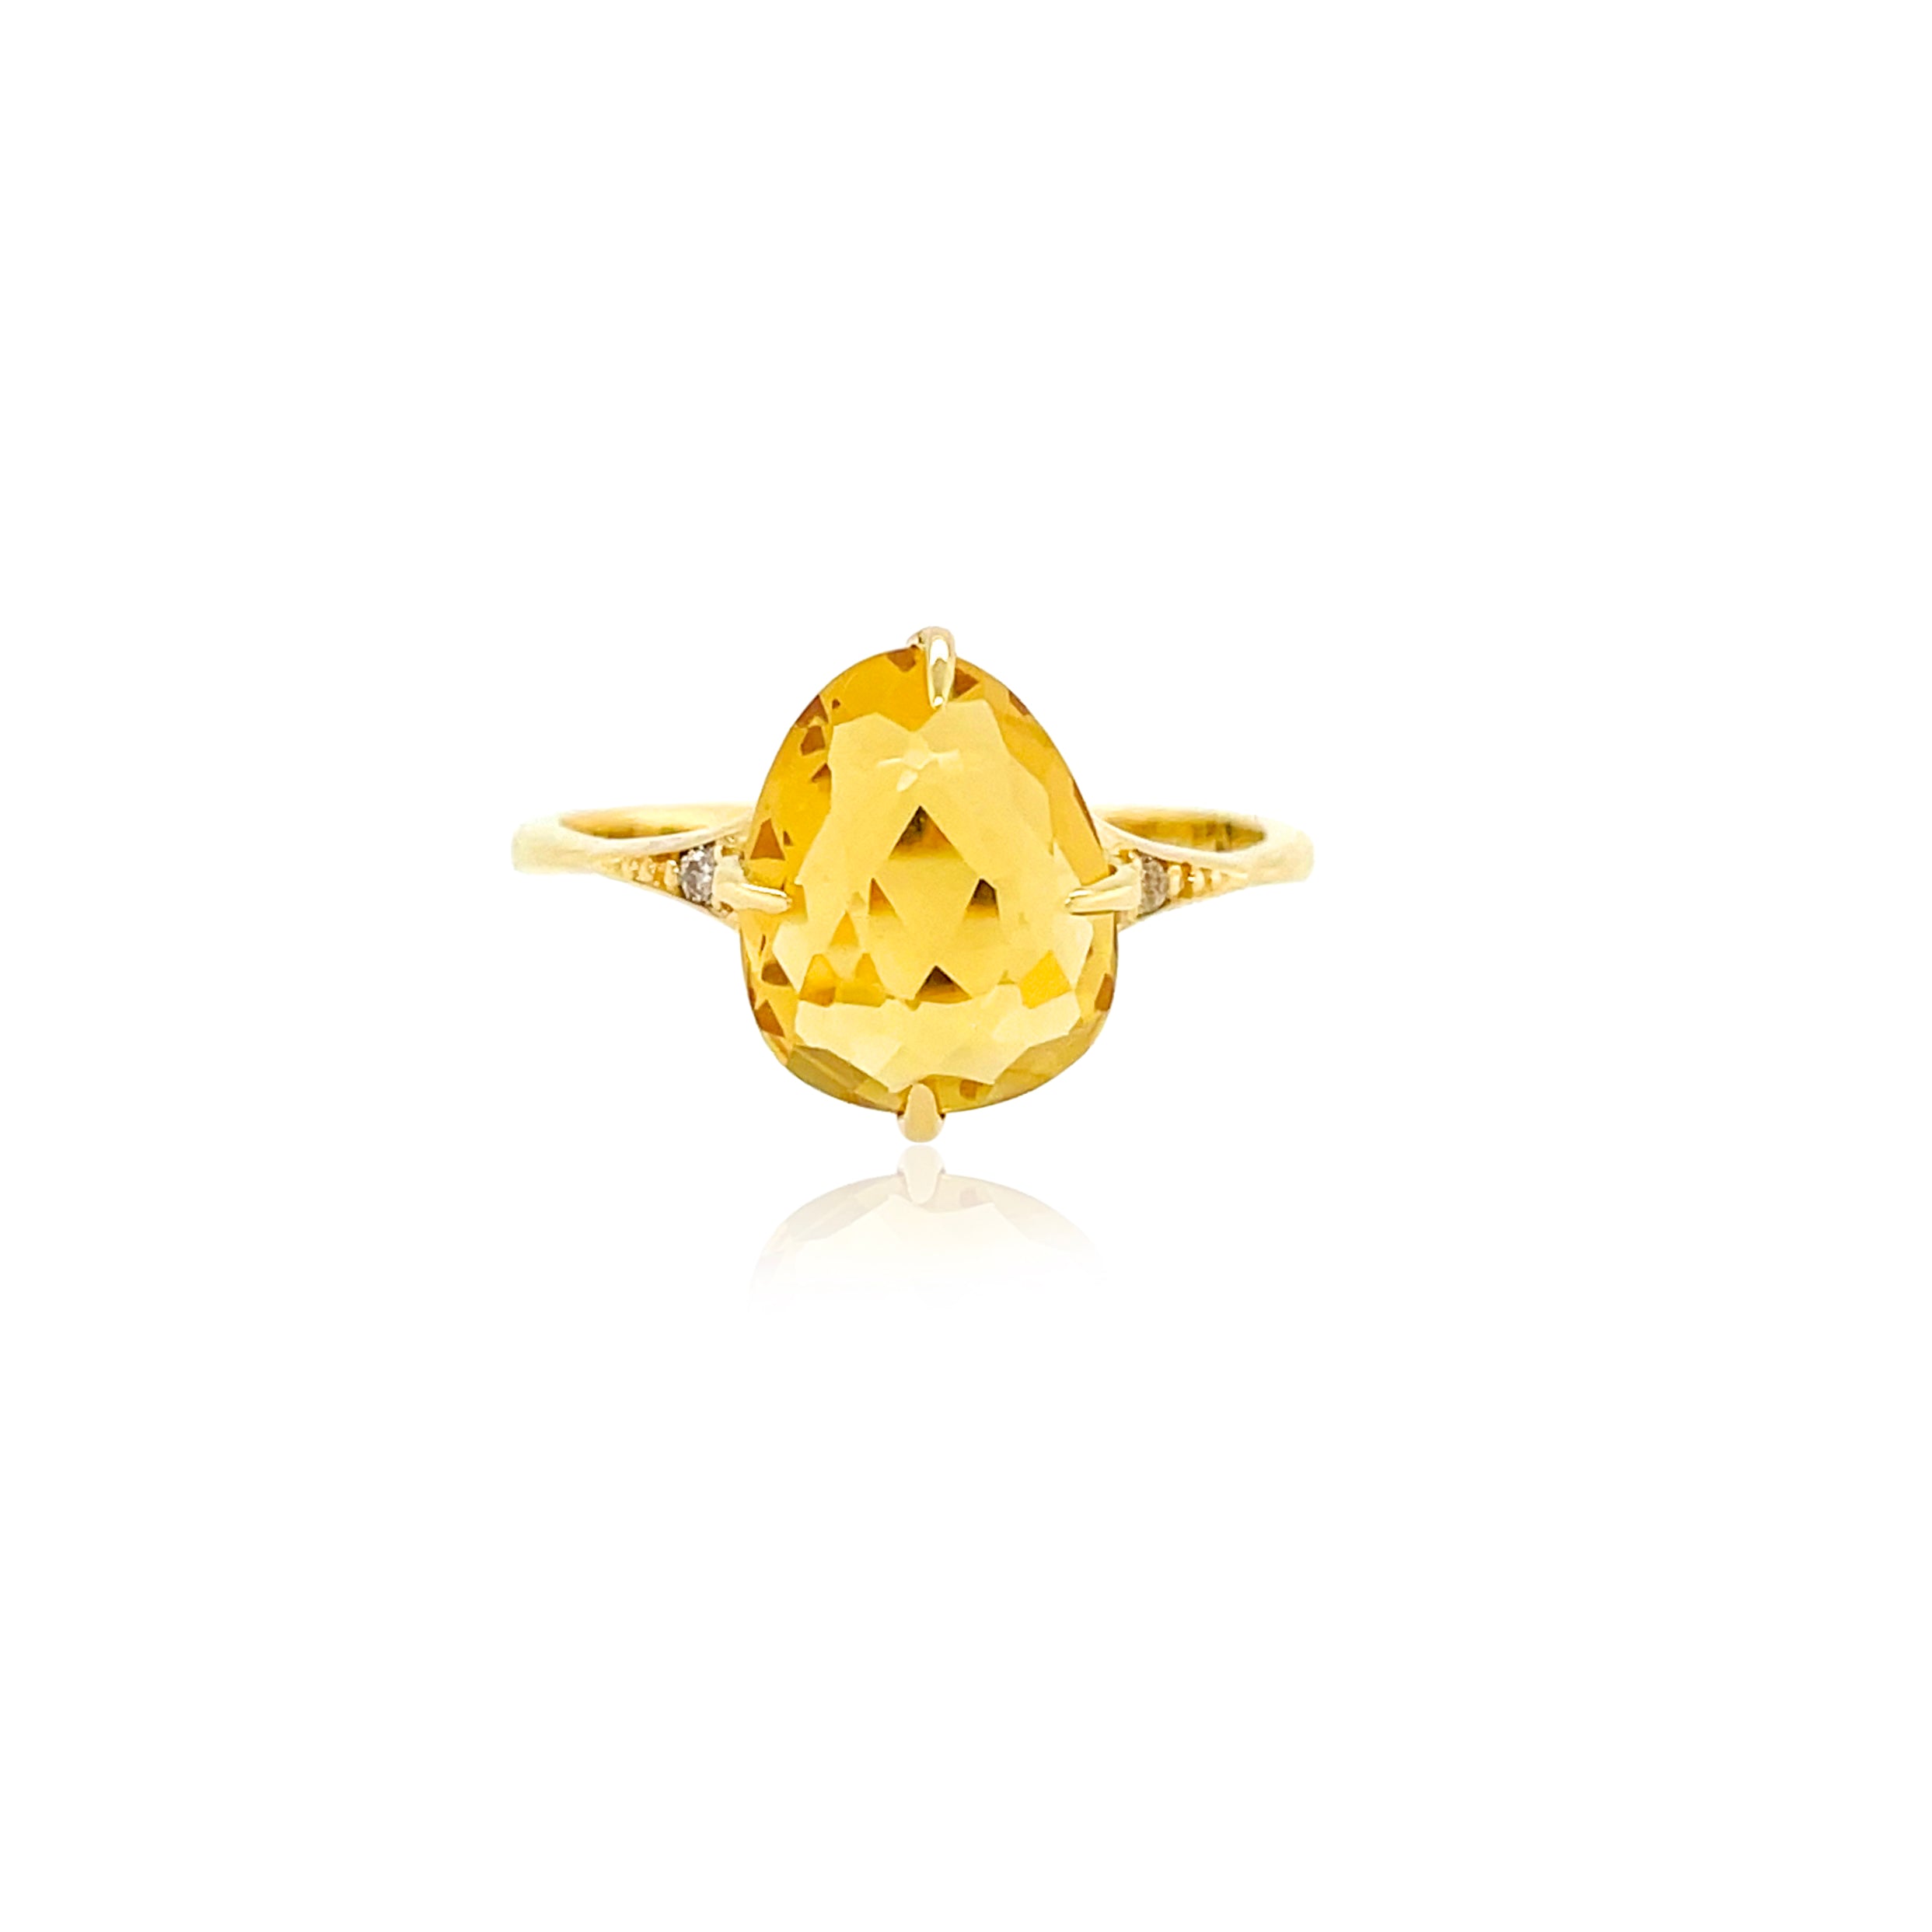 Sugar loaf collection made in Brazil  Tear shape faceted Citrine 8.40 cts  Round small diamonds 0.09 cts  Set in 18k yellow gold  Secure hinged system  11.50 mm.